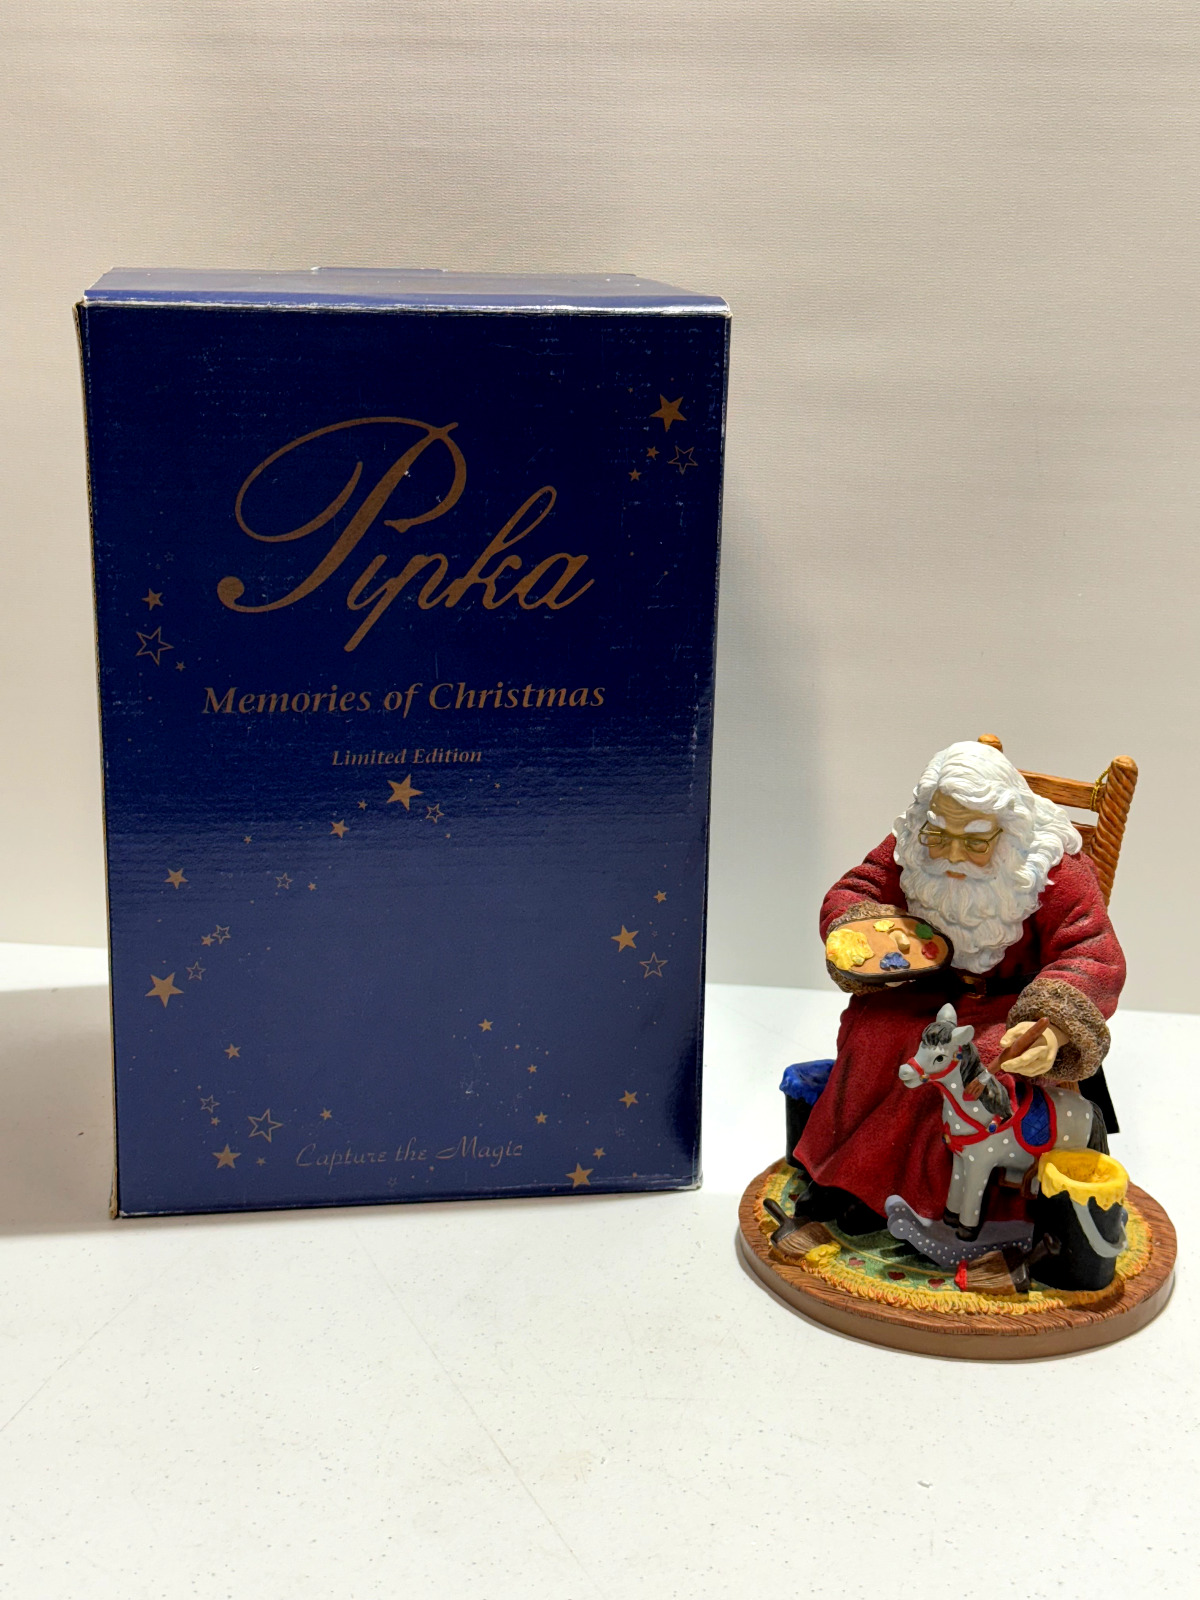 Vintage Pipka Santa's Spotted Grey Limited Ed 3005/3600 Memories of Christmas